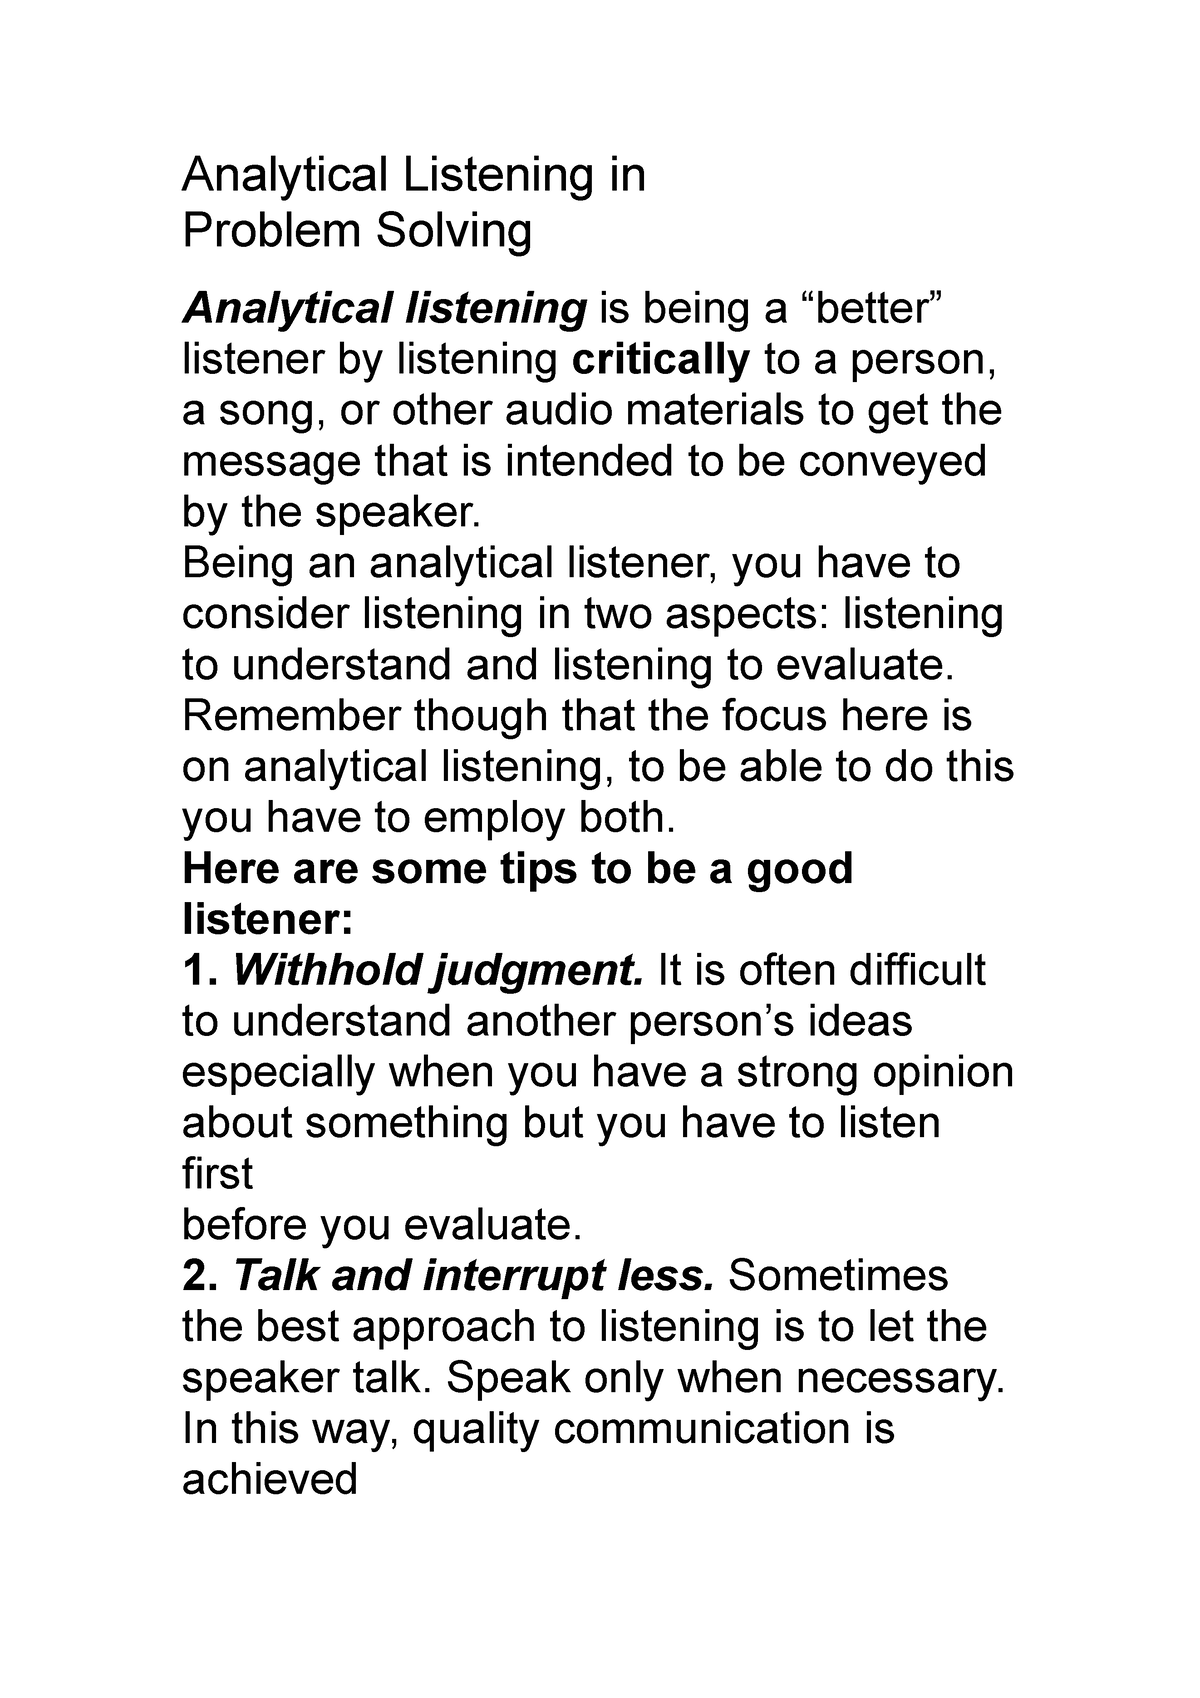 lesson plan on employ analytical listening in problem solving